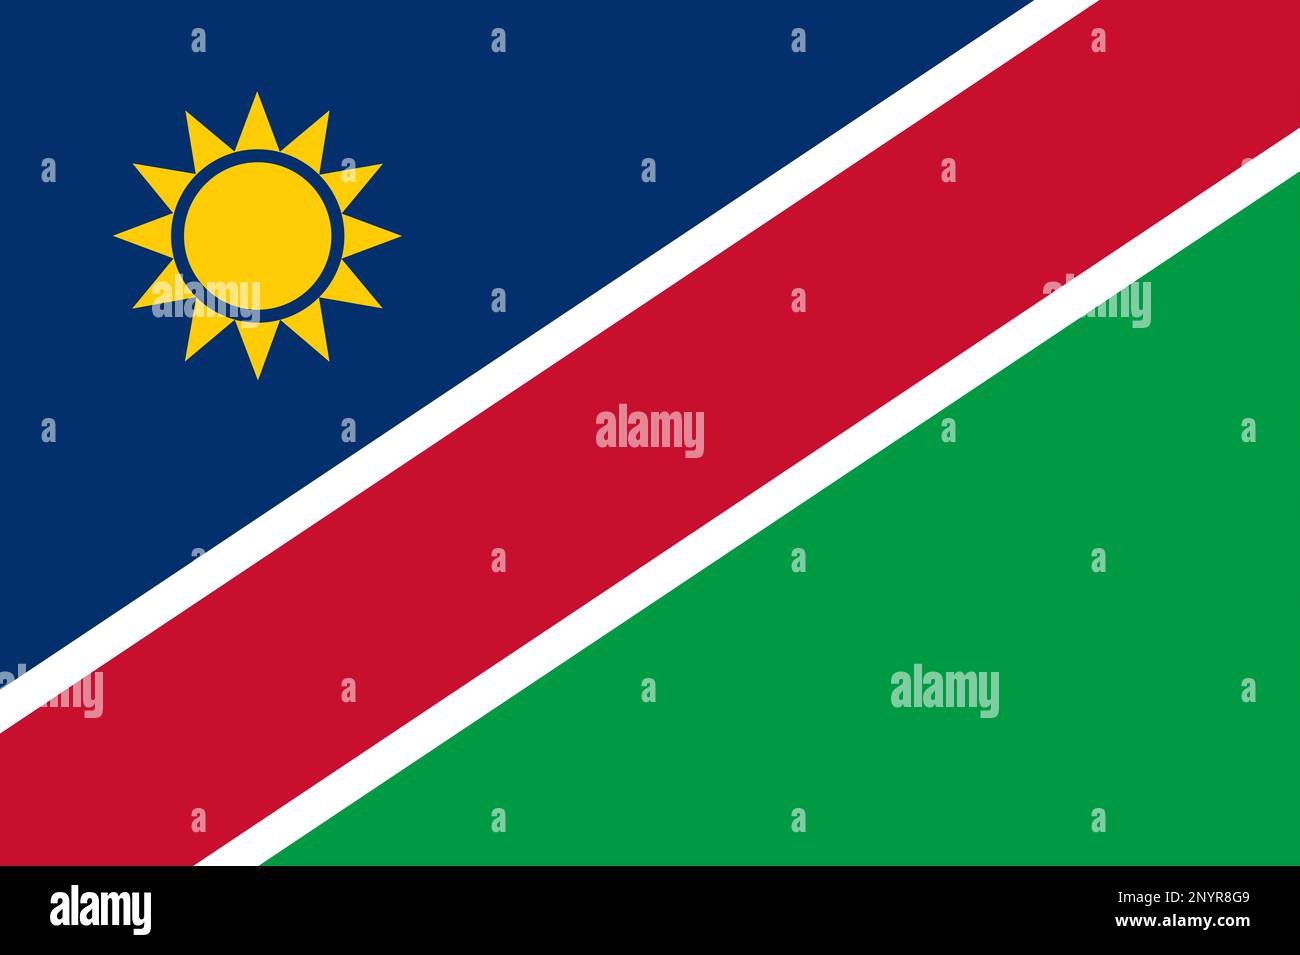 National flag of the Republic of Namibia Stock Photo